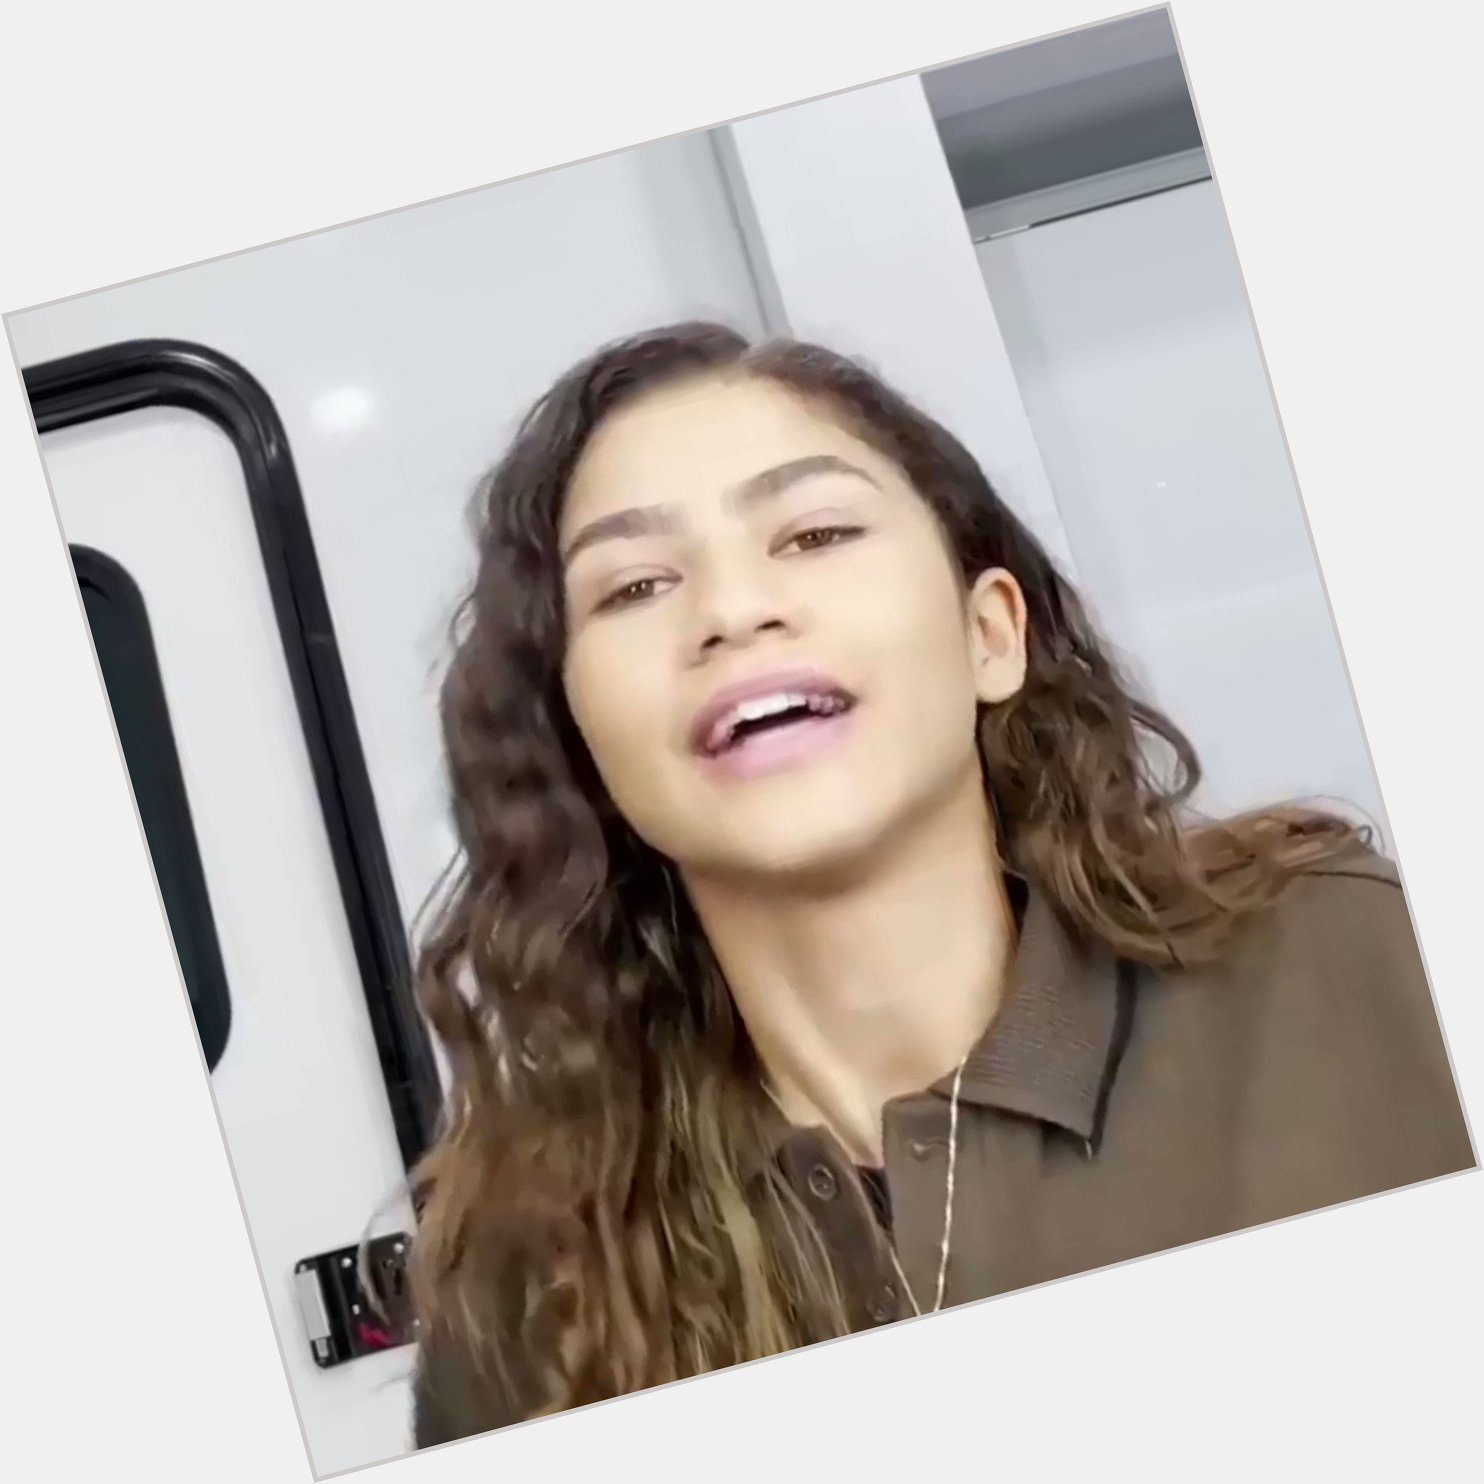 HAPPY BDAY TO MY FAVORITE GIRL I LVOE YOU SO MUCH ZENDAYA  